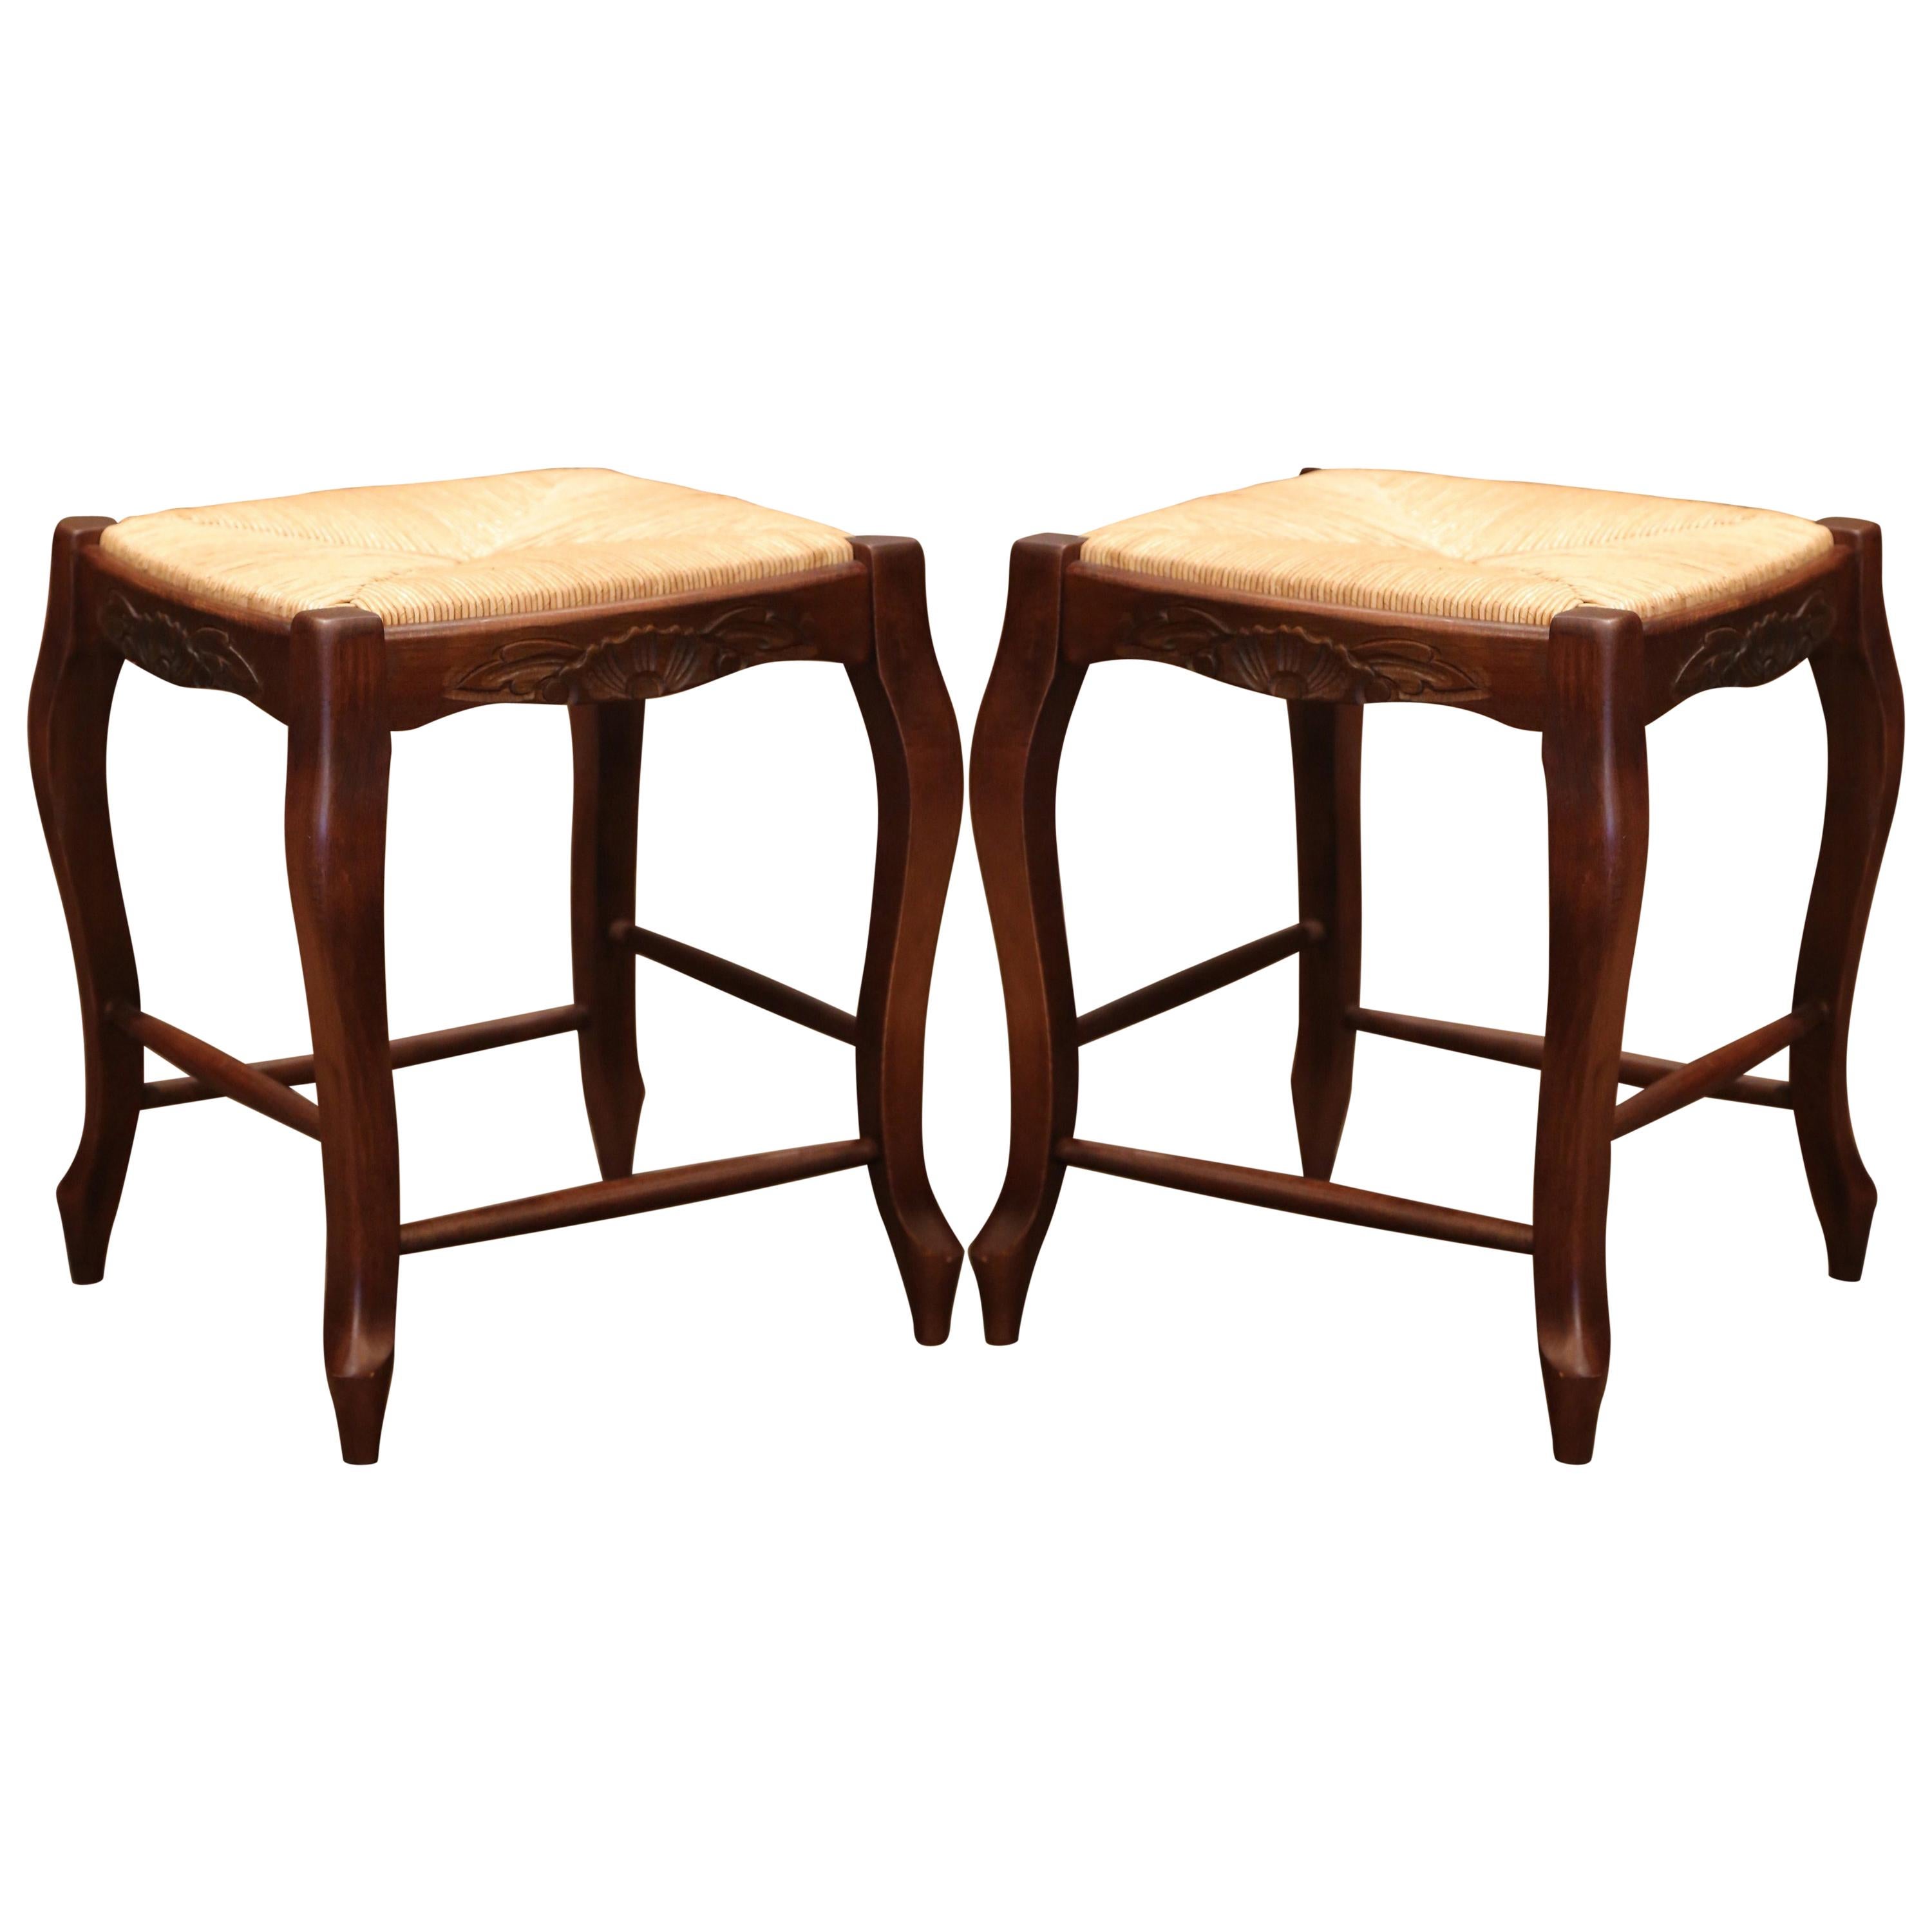 Pair of French Louis XV Carved Beech Wood Stools with Rush Seat